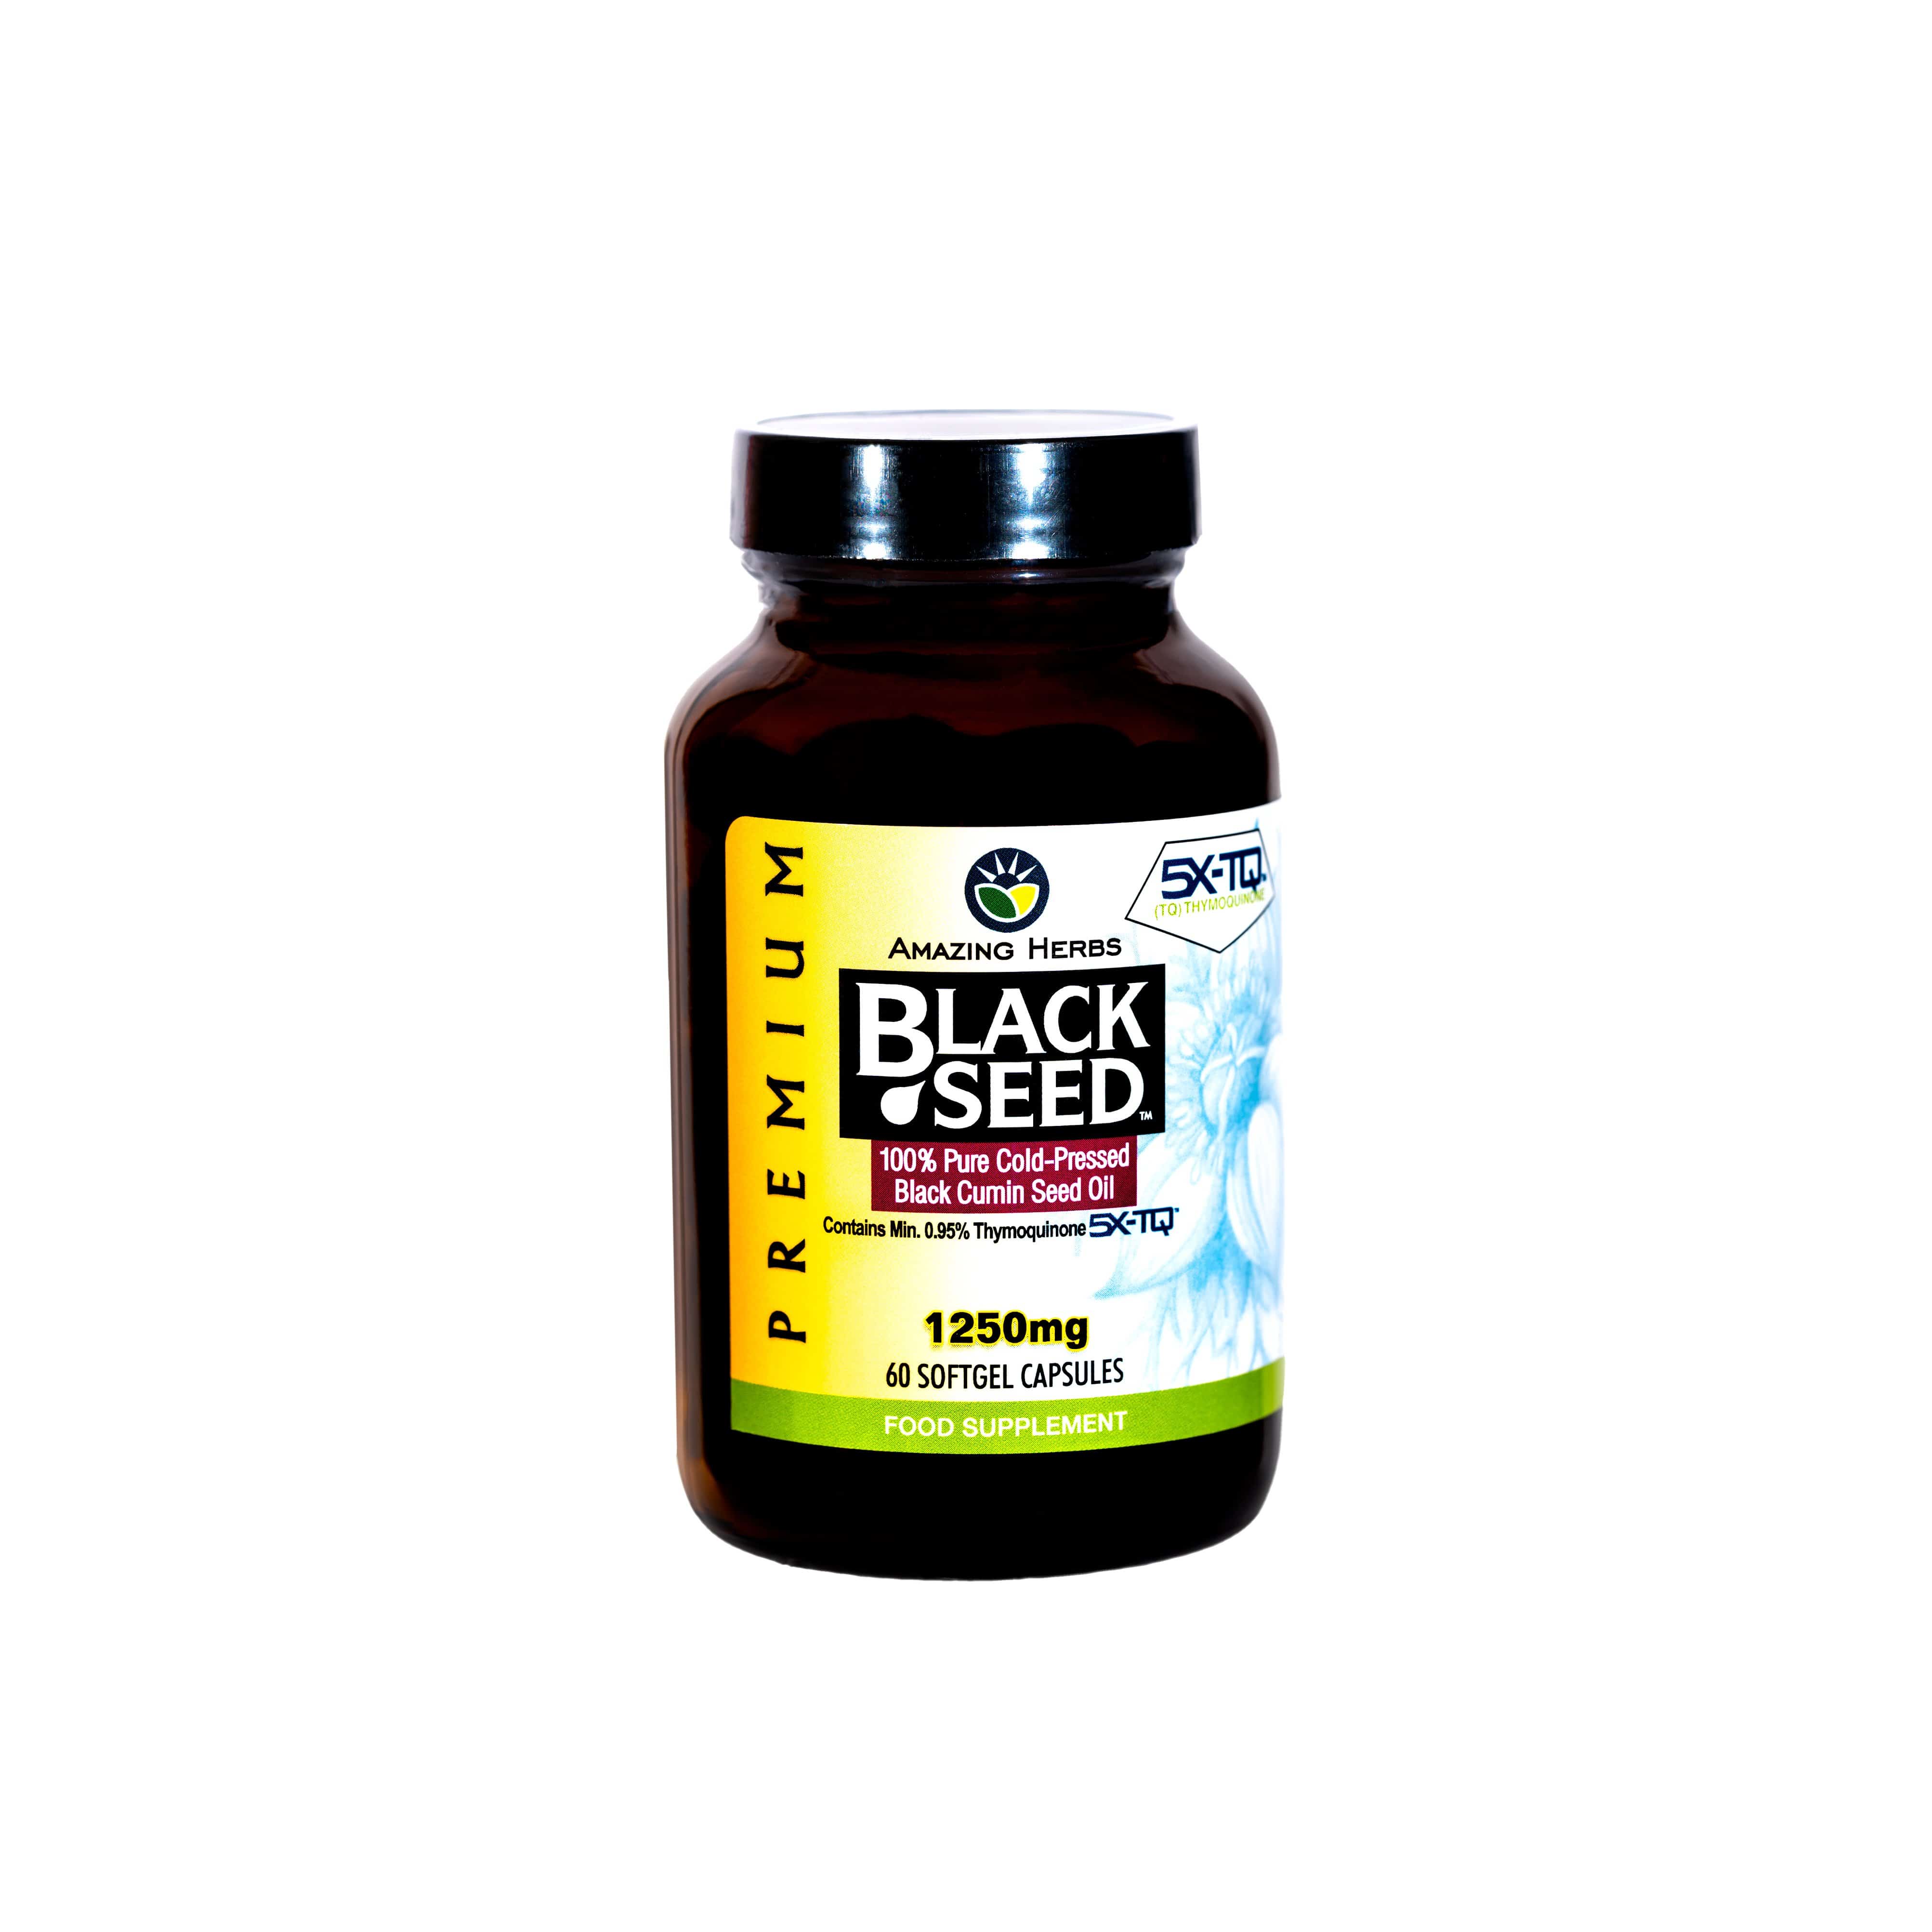 Amazing Herbs UK New Product - Amazing Herbs Premium Black Seed Oil Softgels 1250mg, 60 count